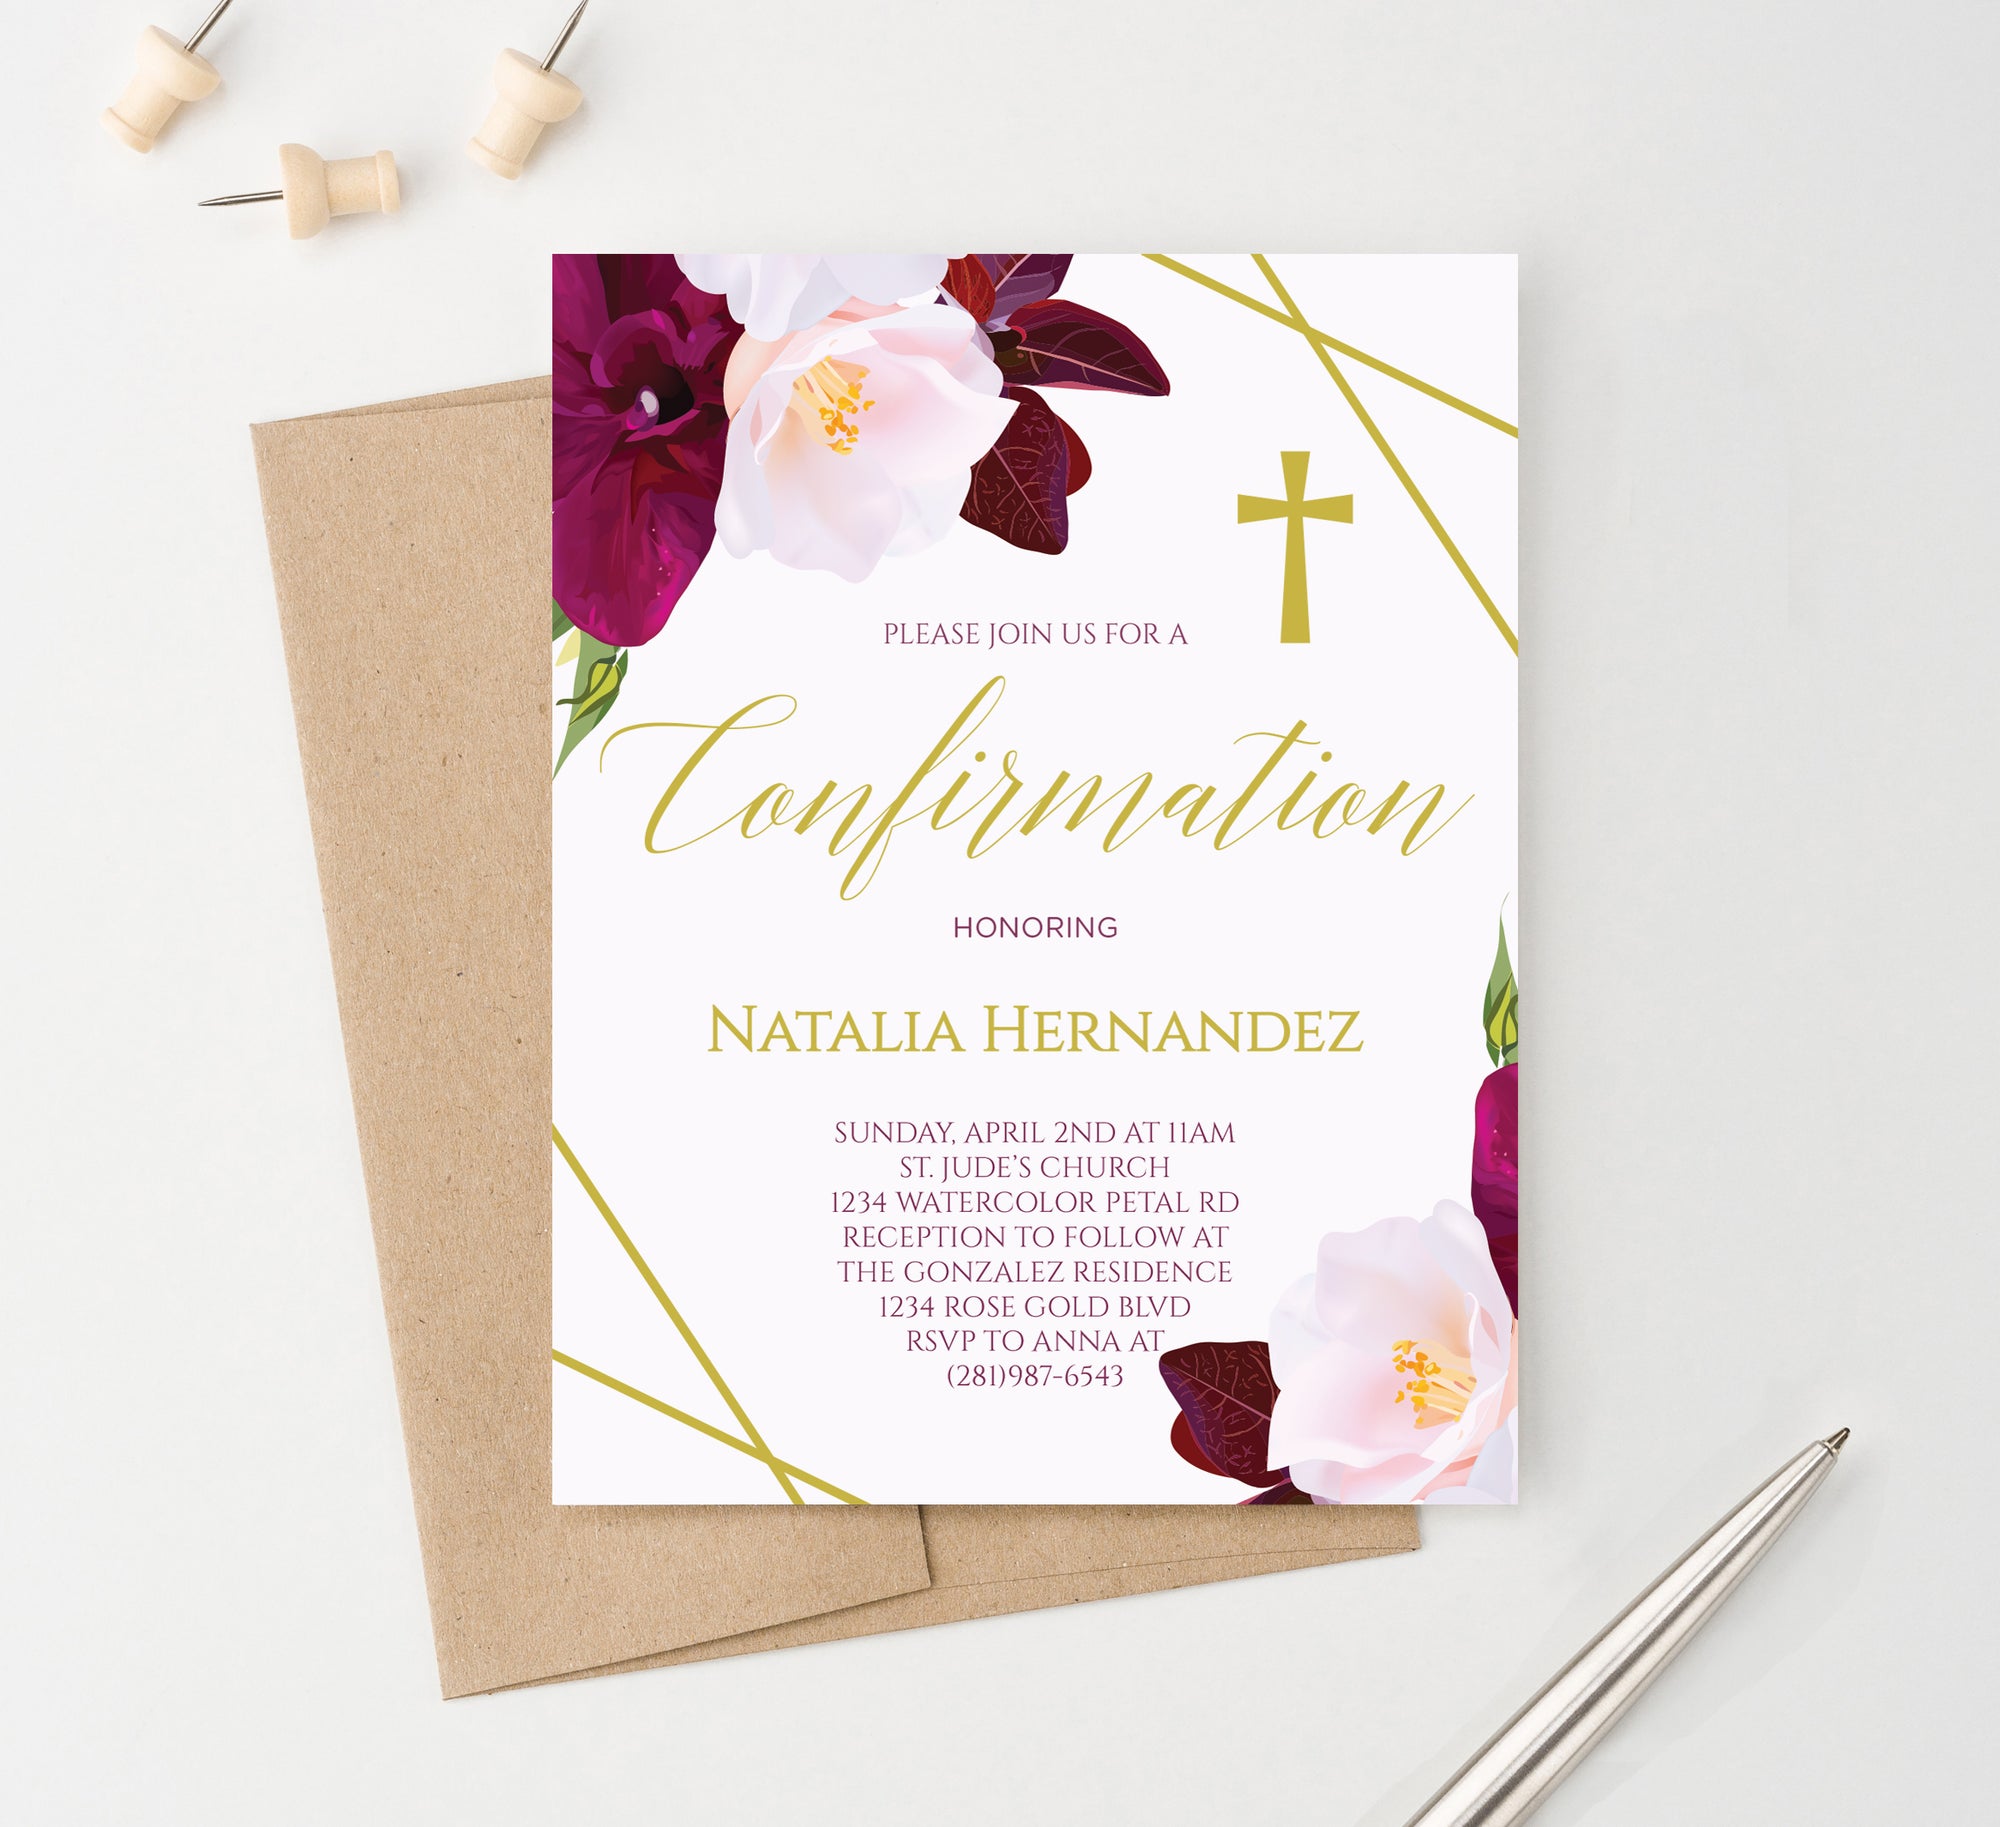 Personalized Burgundy And Gold Confirmation Invite Card With Florals